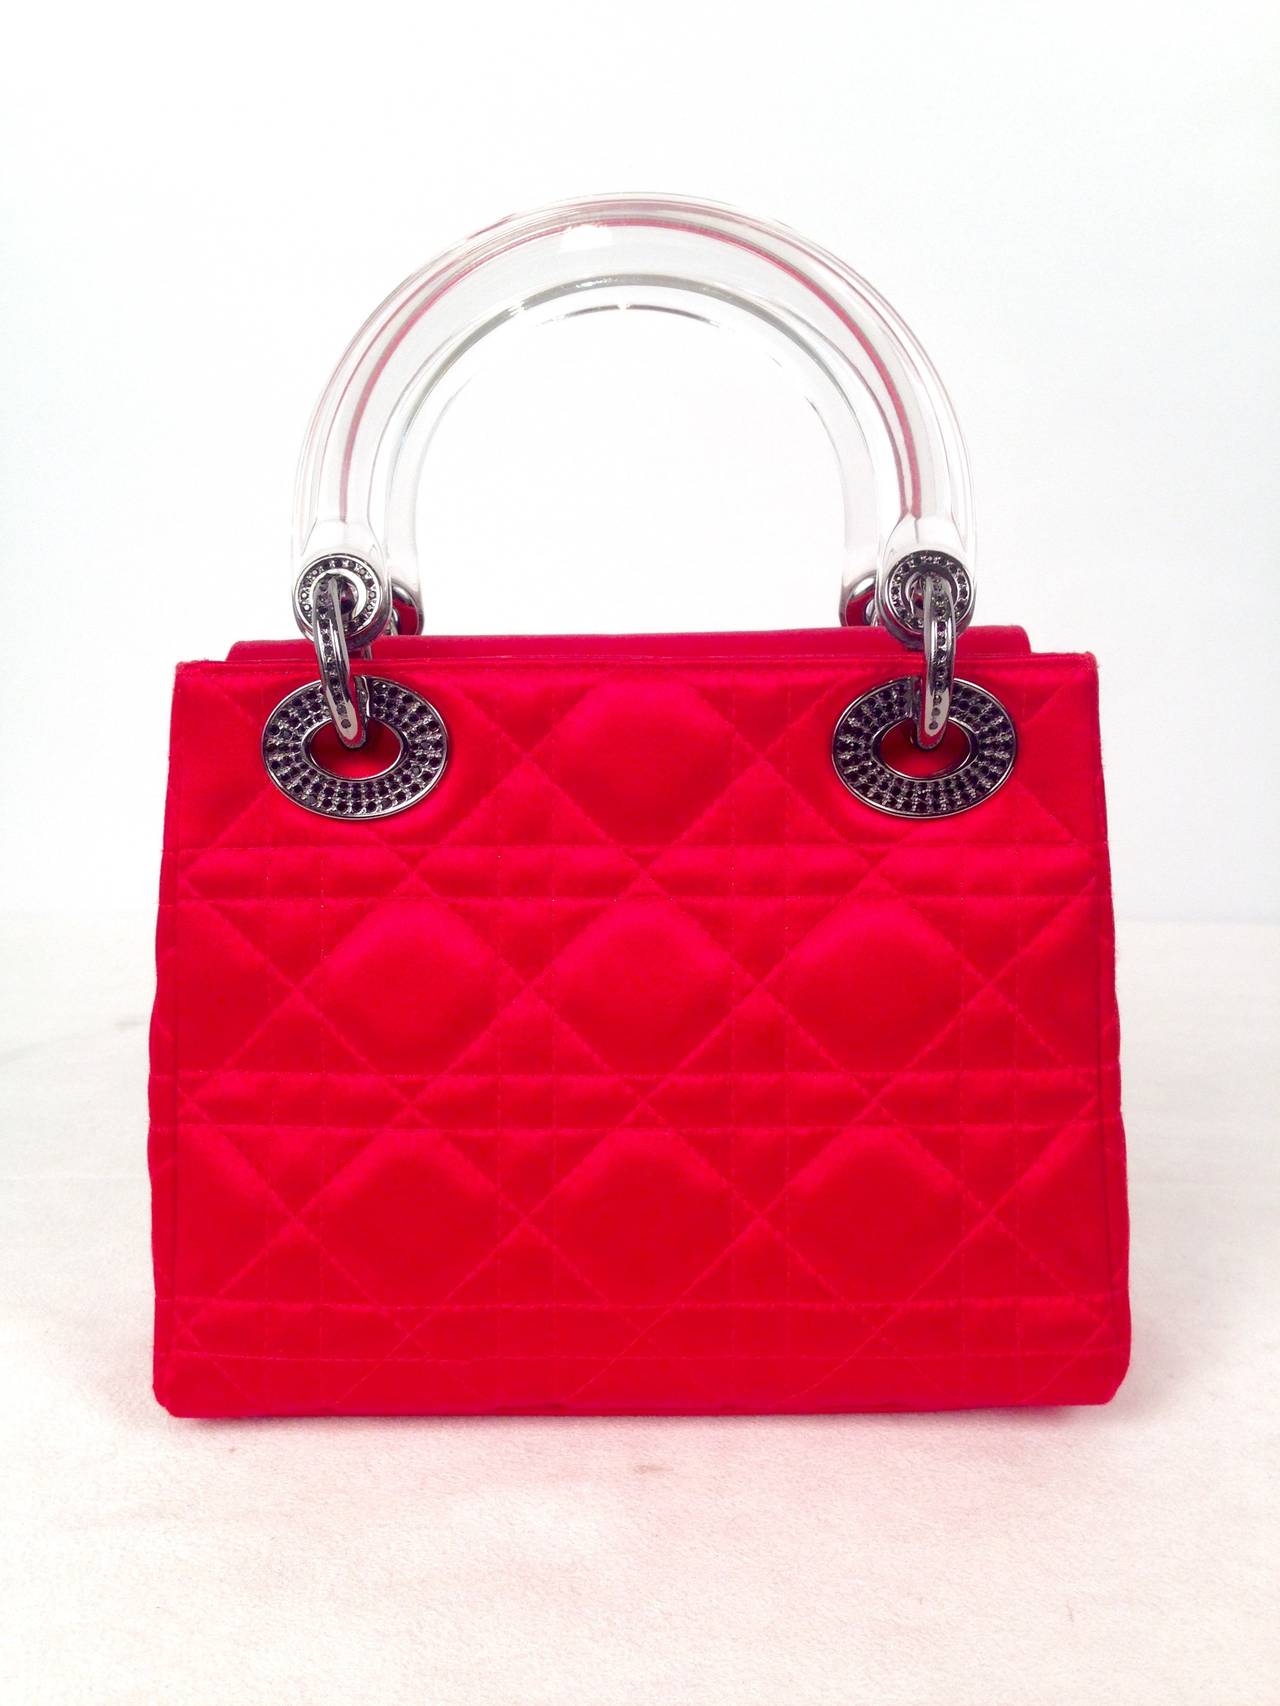 The Lady in RED!  Named for Lady Diana, this iconic Christian Dior bag is crafted from quilted red satin and is accented with black Swarovski crystal embellished 